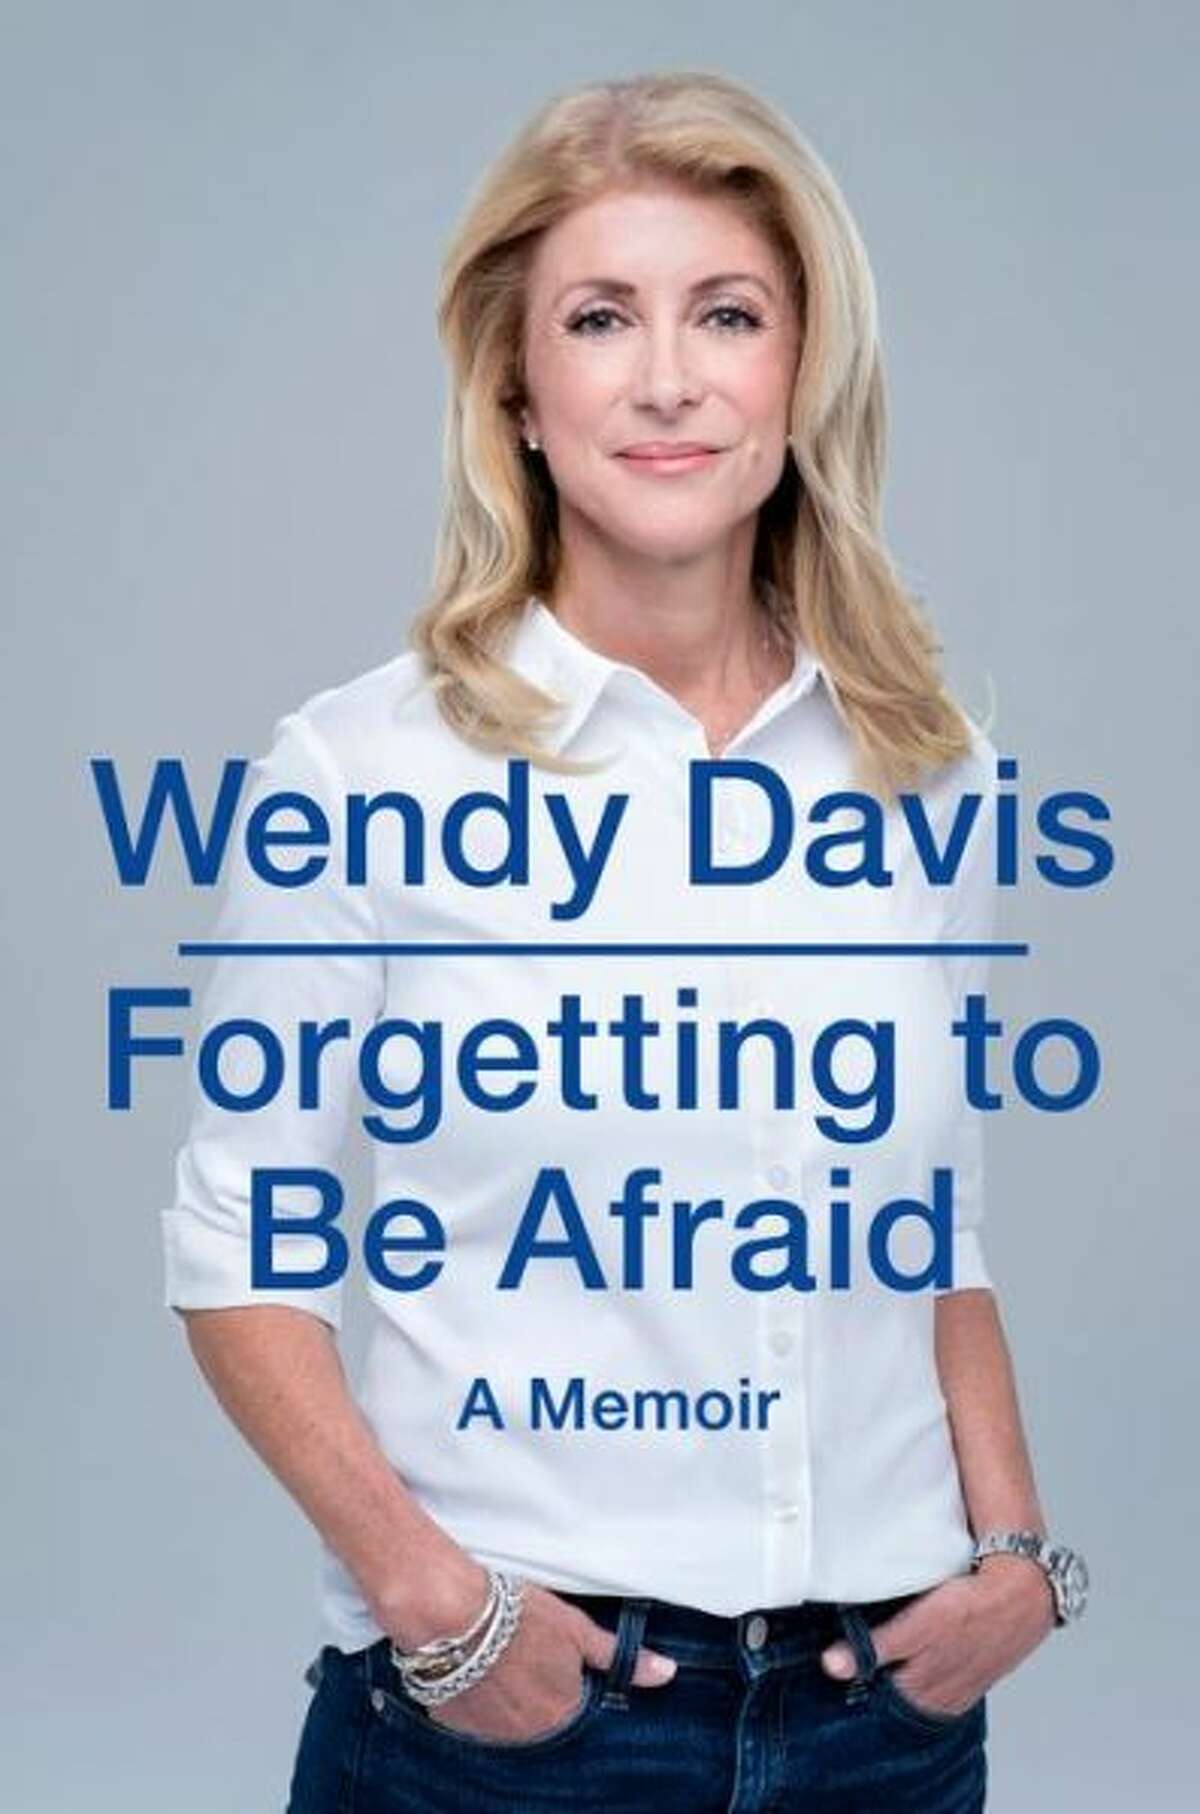 'Forgetting to Be Afraid' by Wendy Davis The Texas state senator and gubernatorial candidate is taking time at the height of her campaign to go on a book tour with her memoir. "I've written a book about my life, about the challenges I've faced and how those difficulties helped me as a person and helped me overcome the limits of fear and become a fighter for the people I represent and the issues that affect them," Davis says in an online video promoting the book. (Tuesday from Blue Rider Press) Davis will sign her book at 1 p.m. Saturday at Brazos Bookstore, 2421 Bissonnet. Purchase a $27.95 book ticket at 713-523-0701 or brazosbookstore.com.